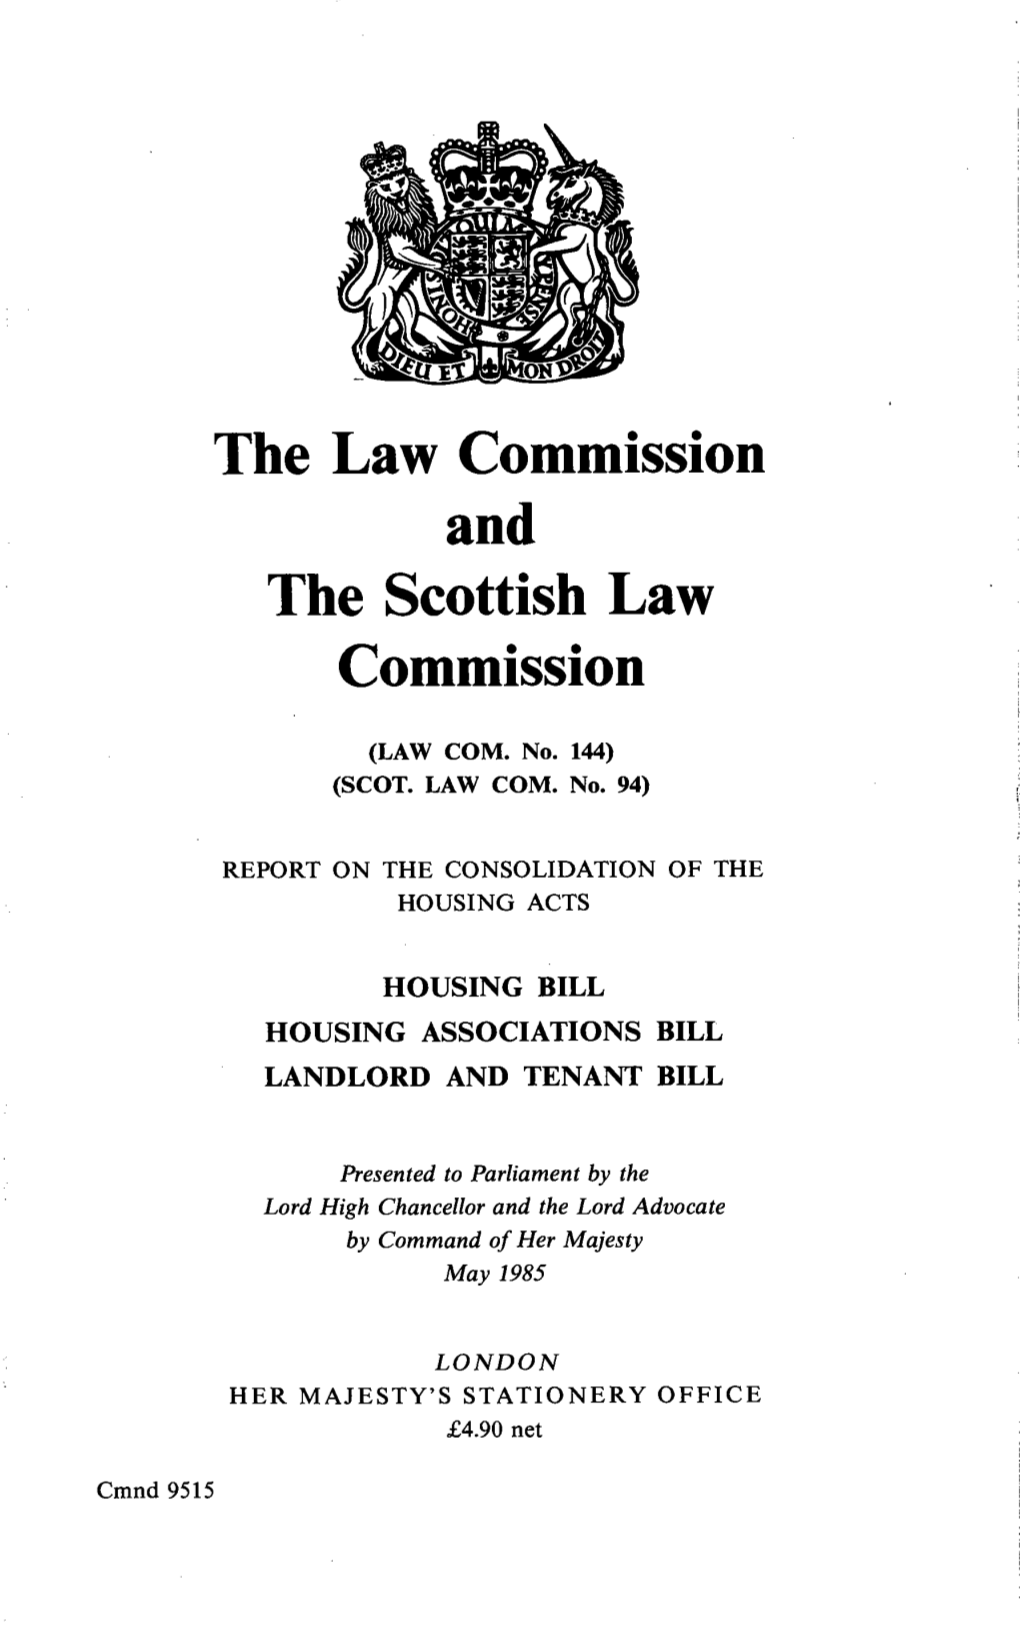 Report on the Consolidation of the Housing Acts